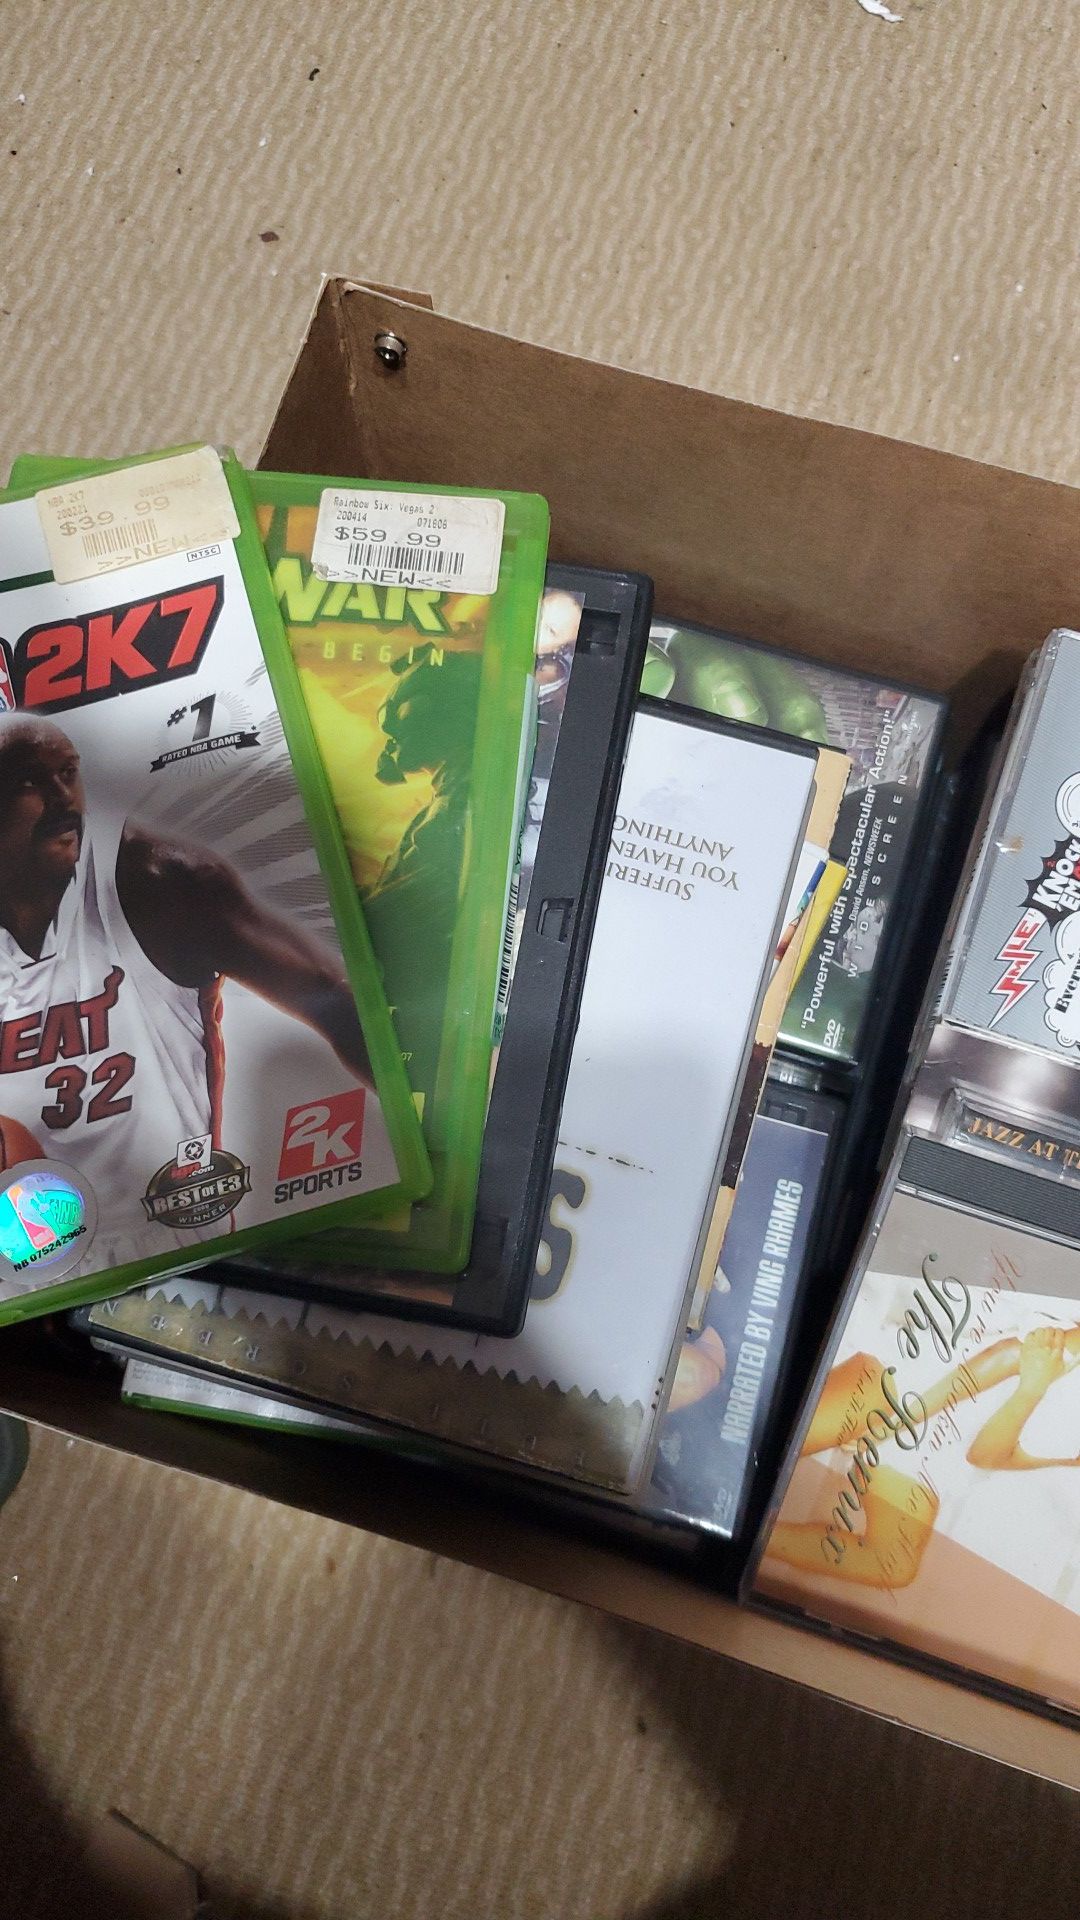 Box full of dvds, cds old video games free